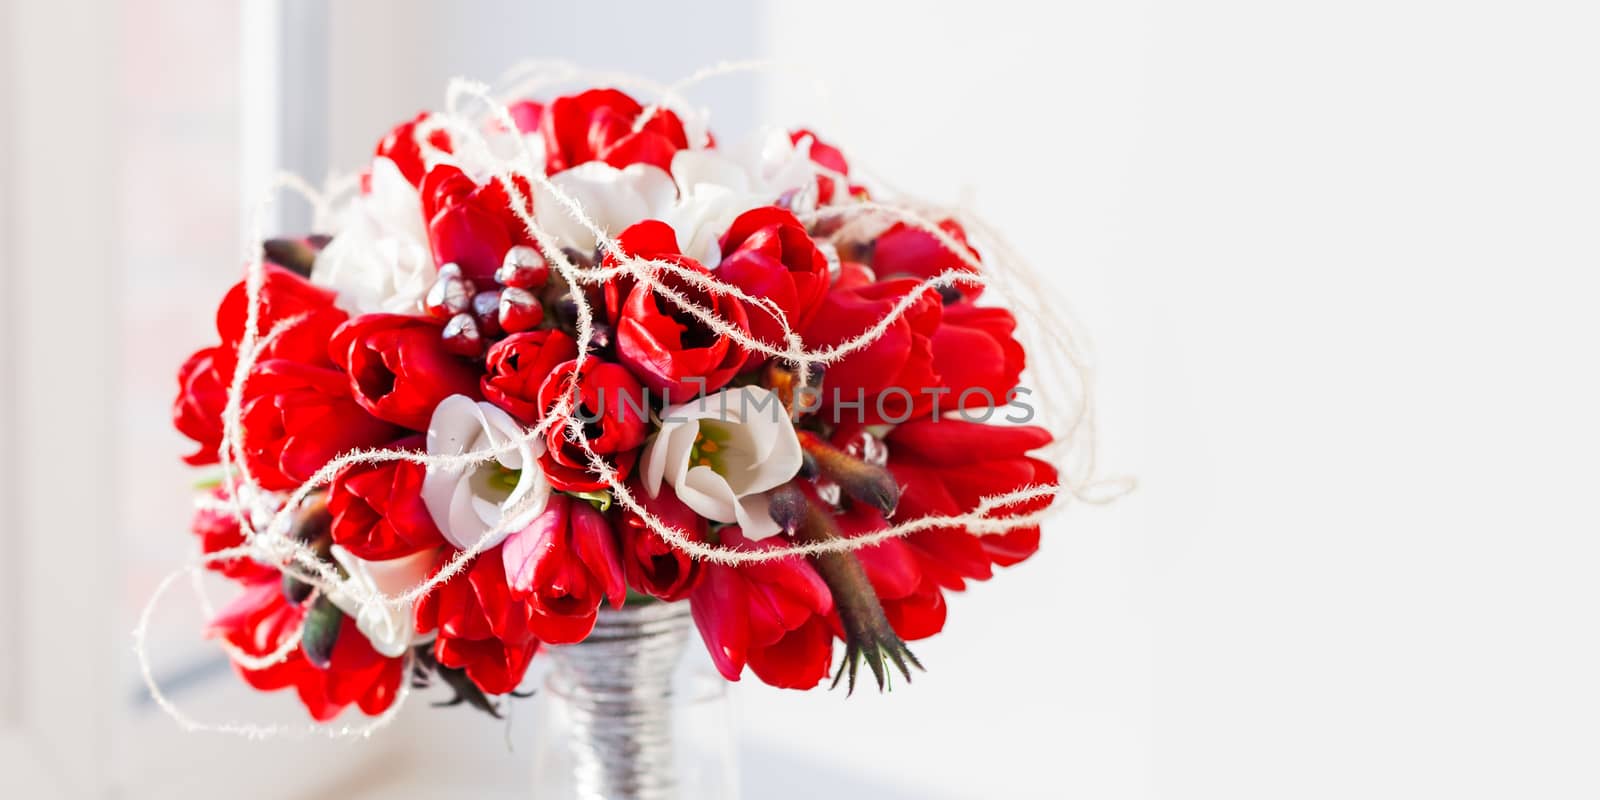 Bridal bouquet in glass vase on sunlight. Traditional floral composition with bright red tulips on window sill. Background with copy space.